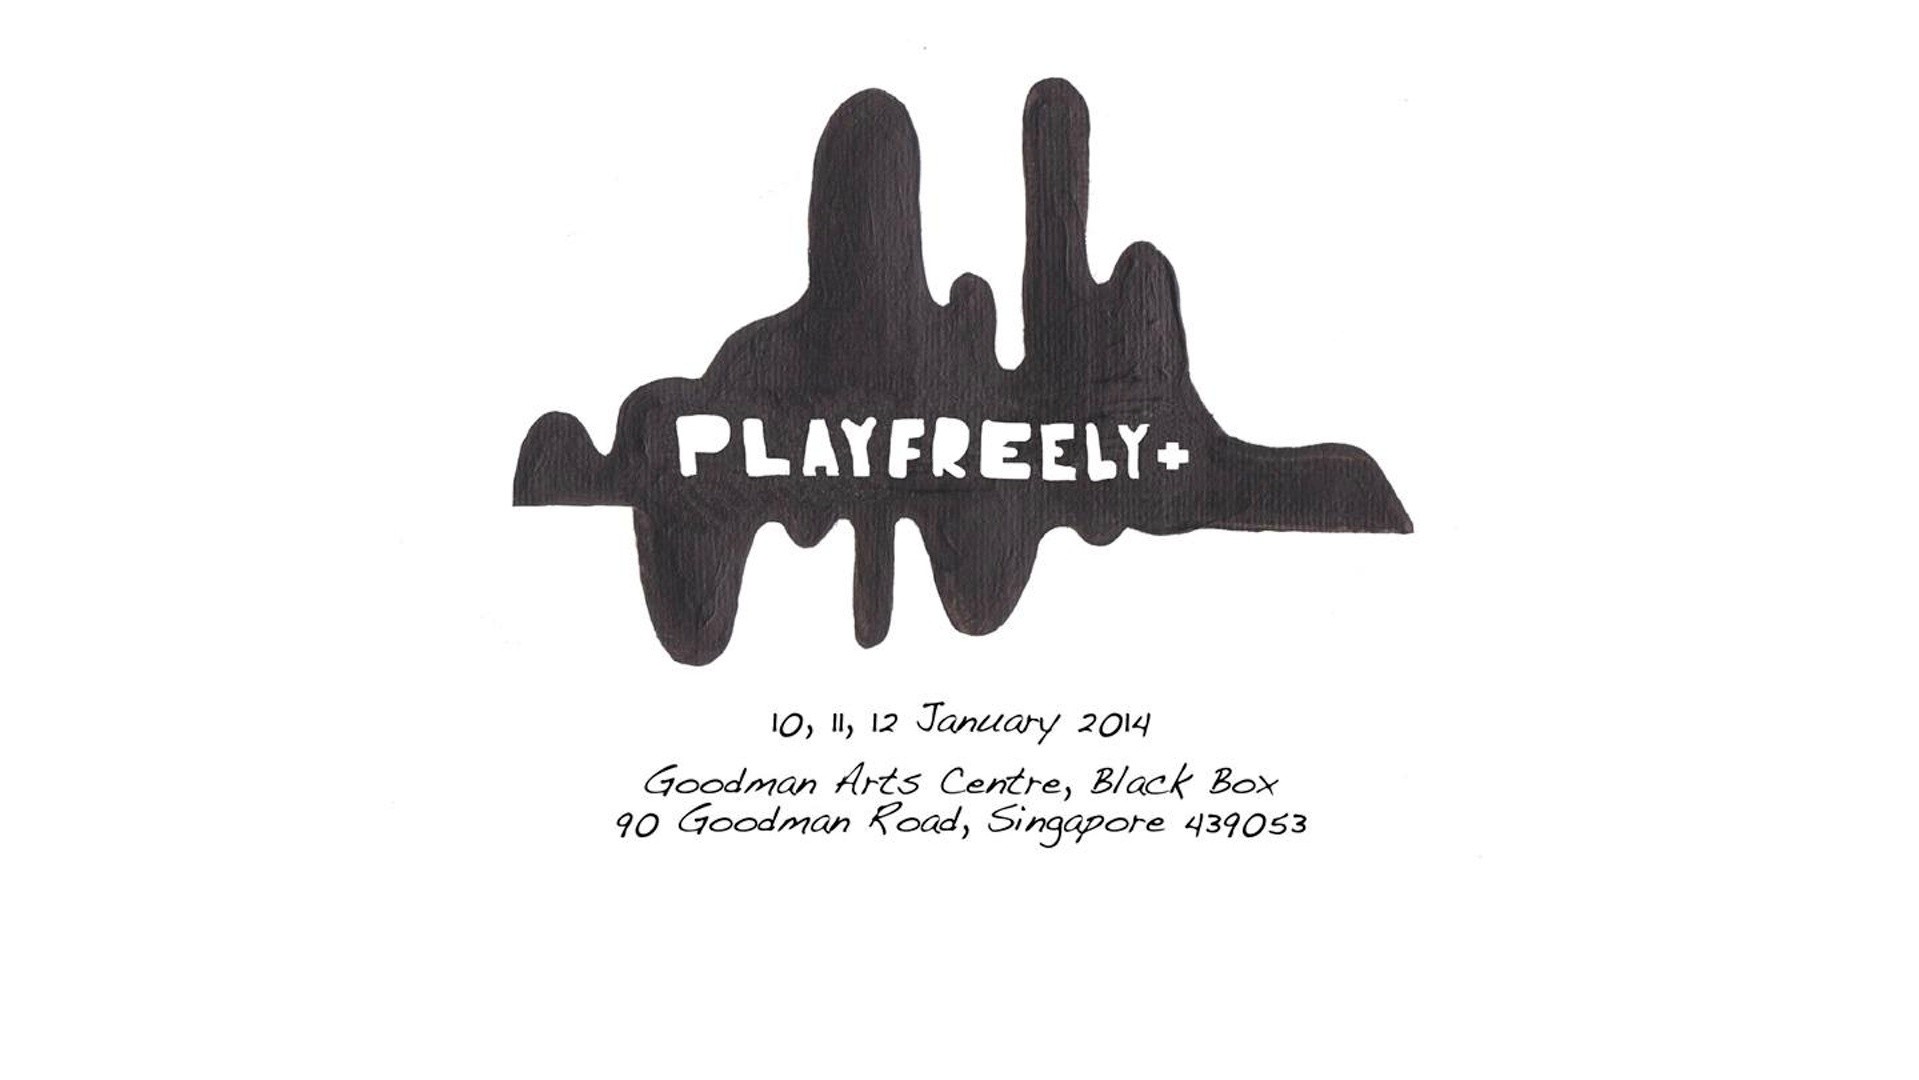 Playfreely+ 2014 (Day 1)